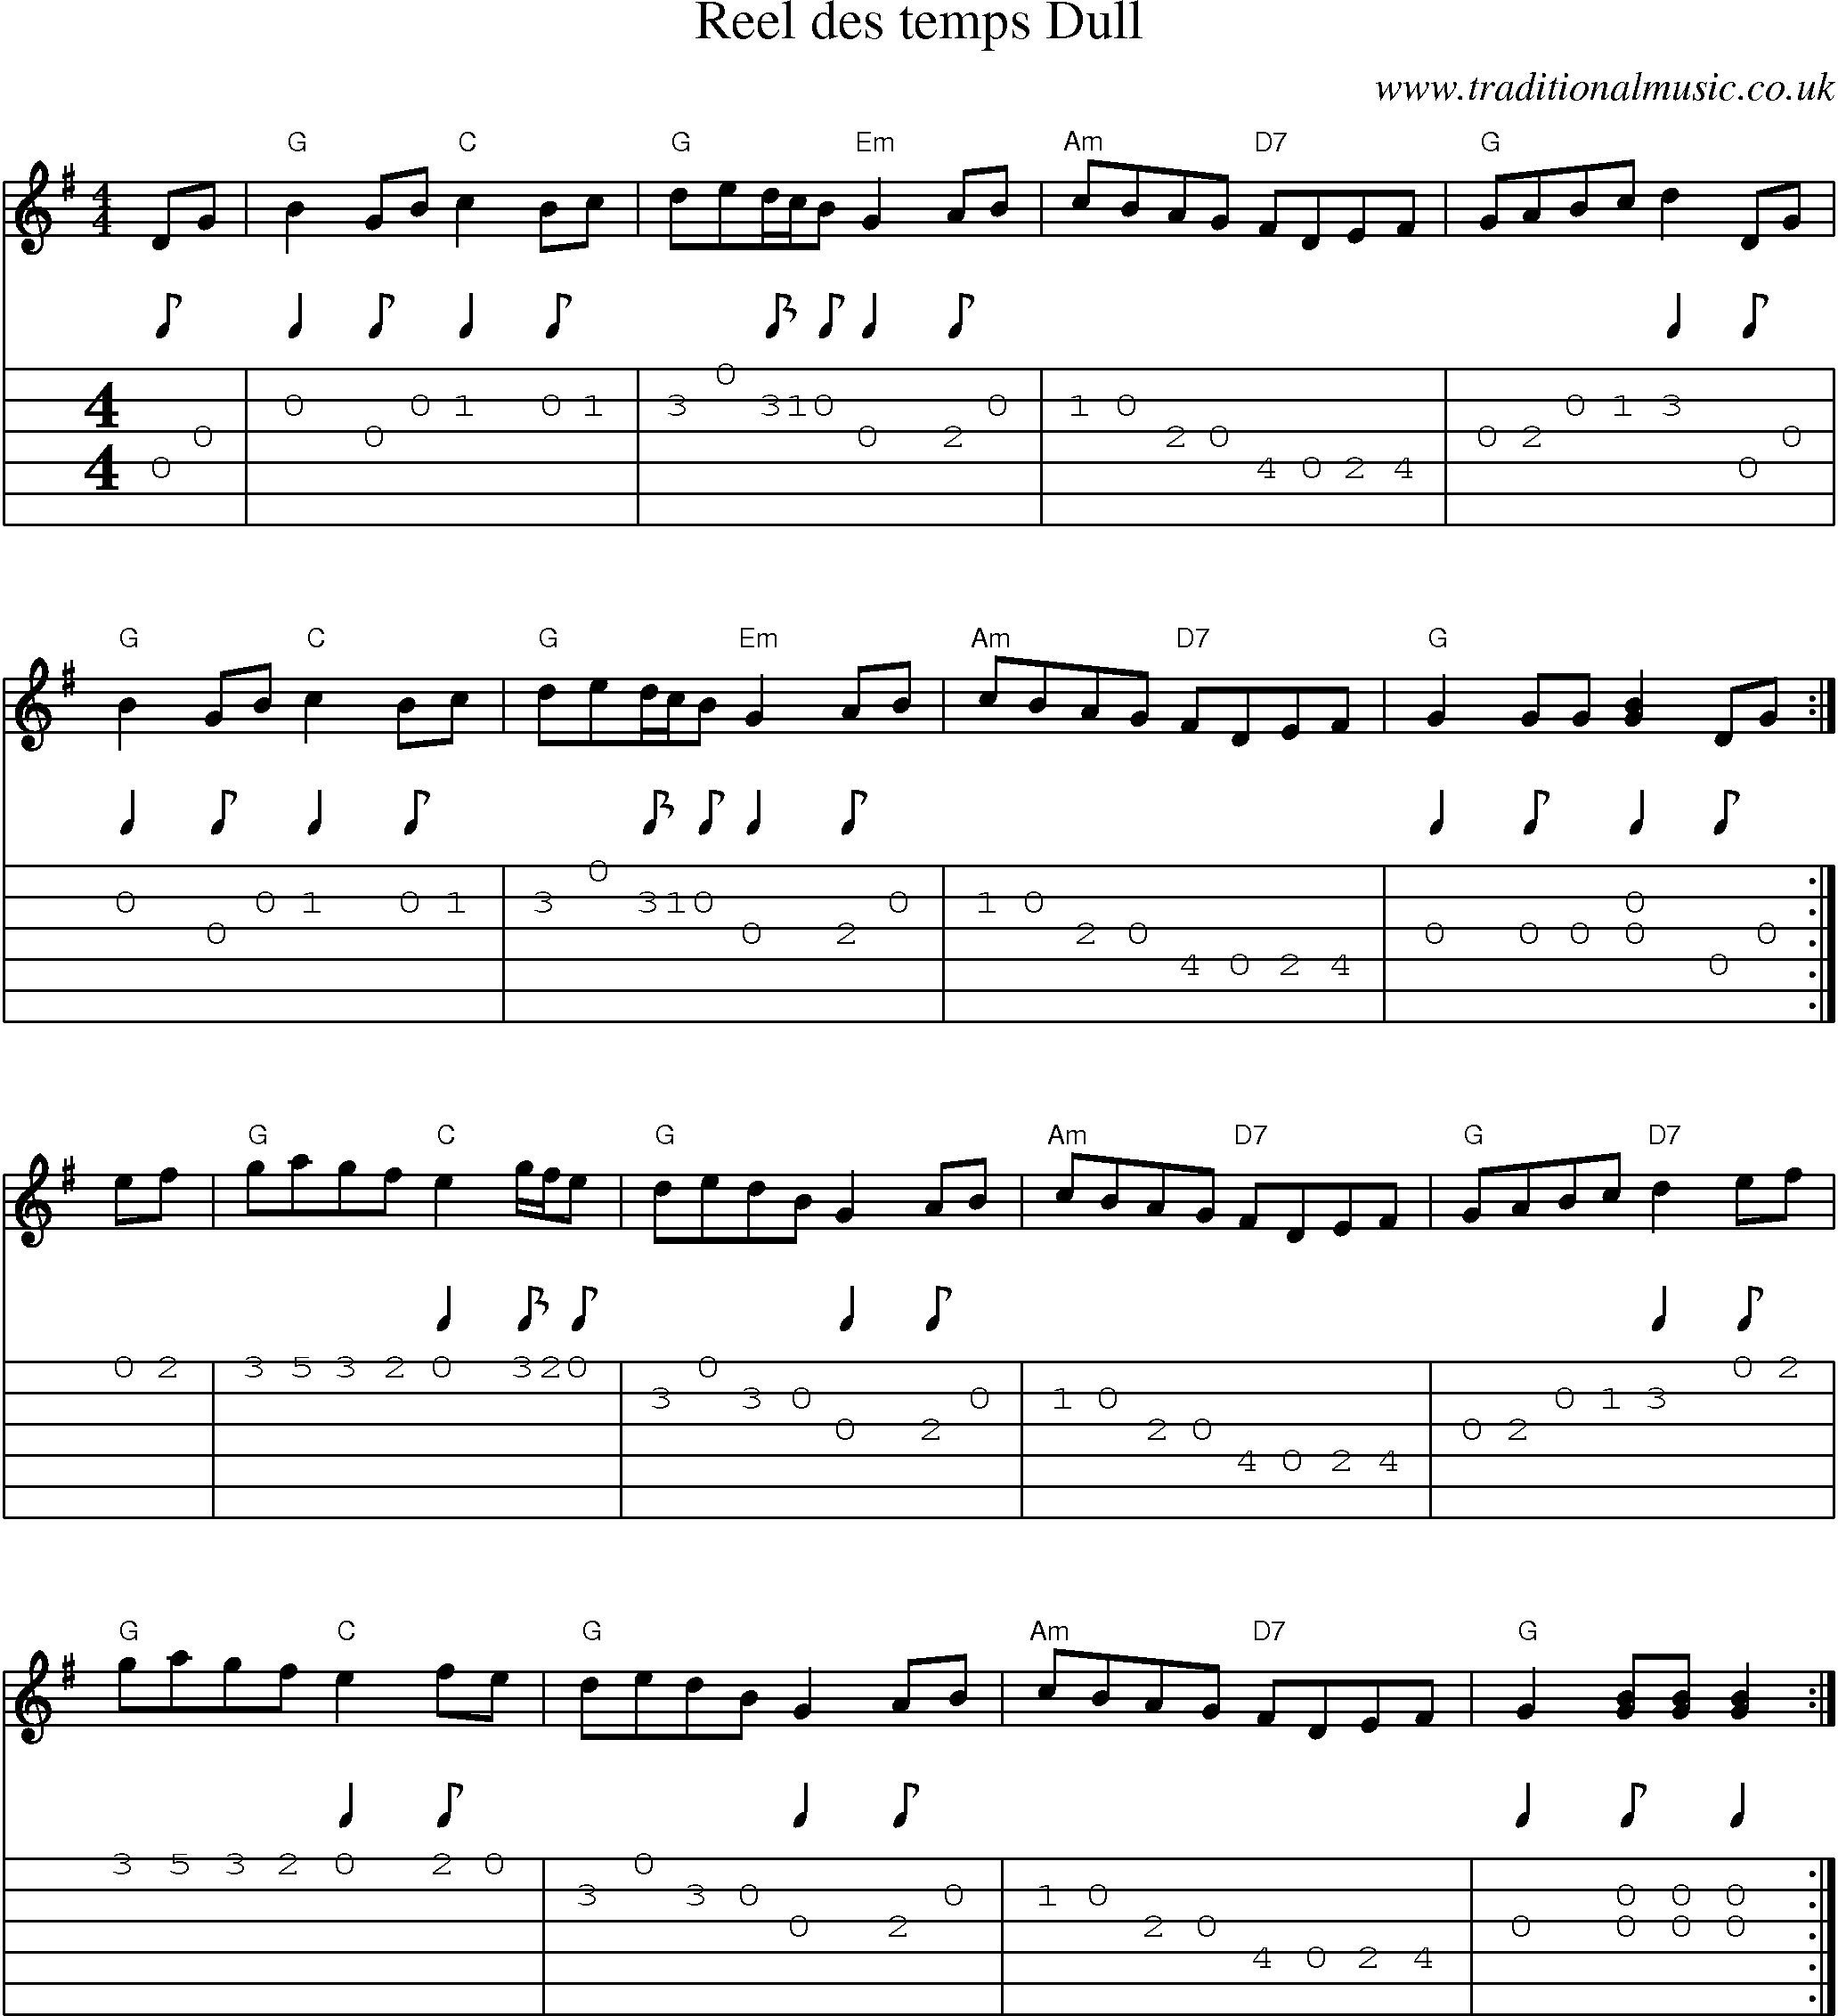 Music Score and Guitar Tabs for Reel Des Temps Dull